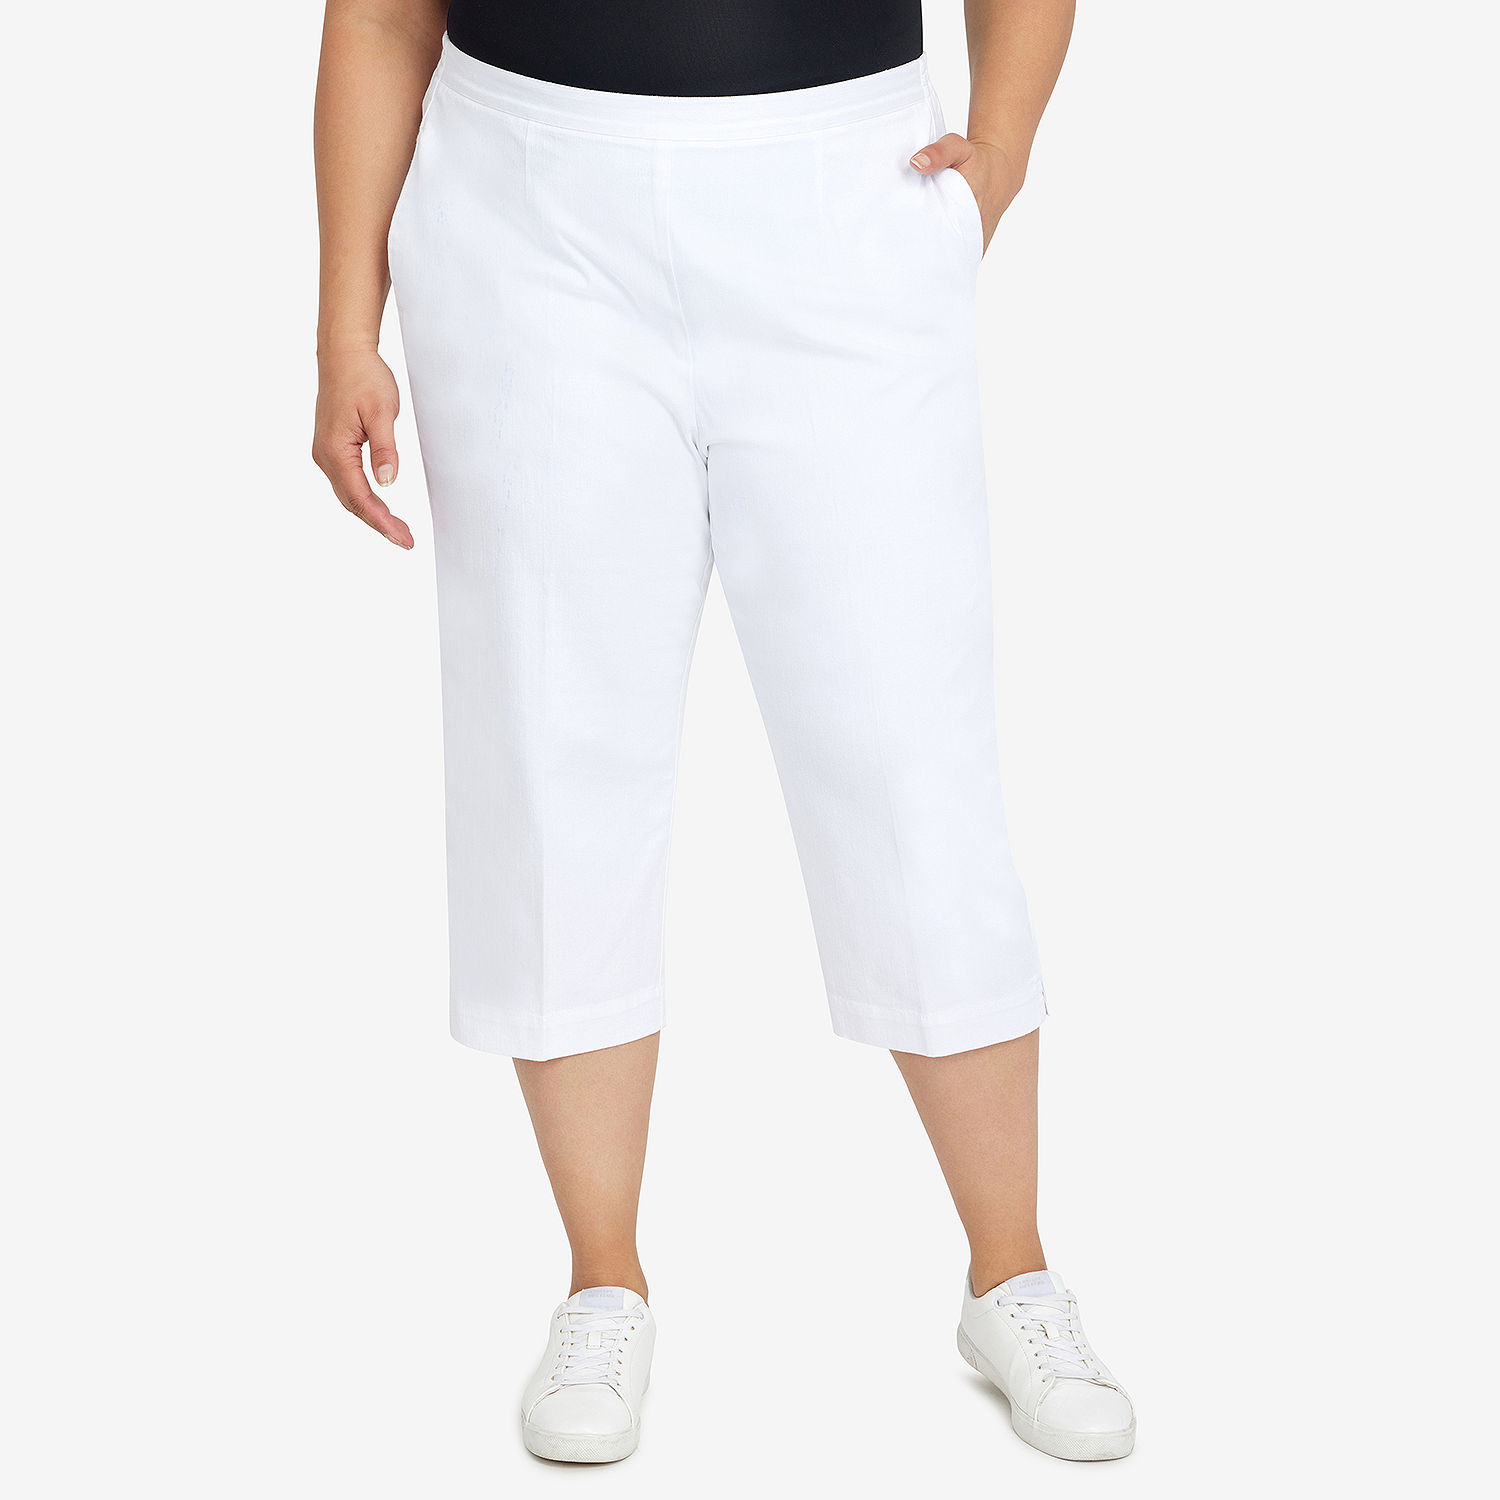 Alfred Dunner Classics Plus Capris Jcpenney